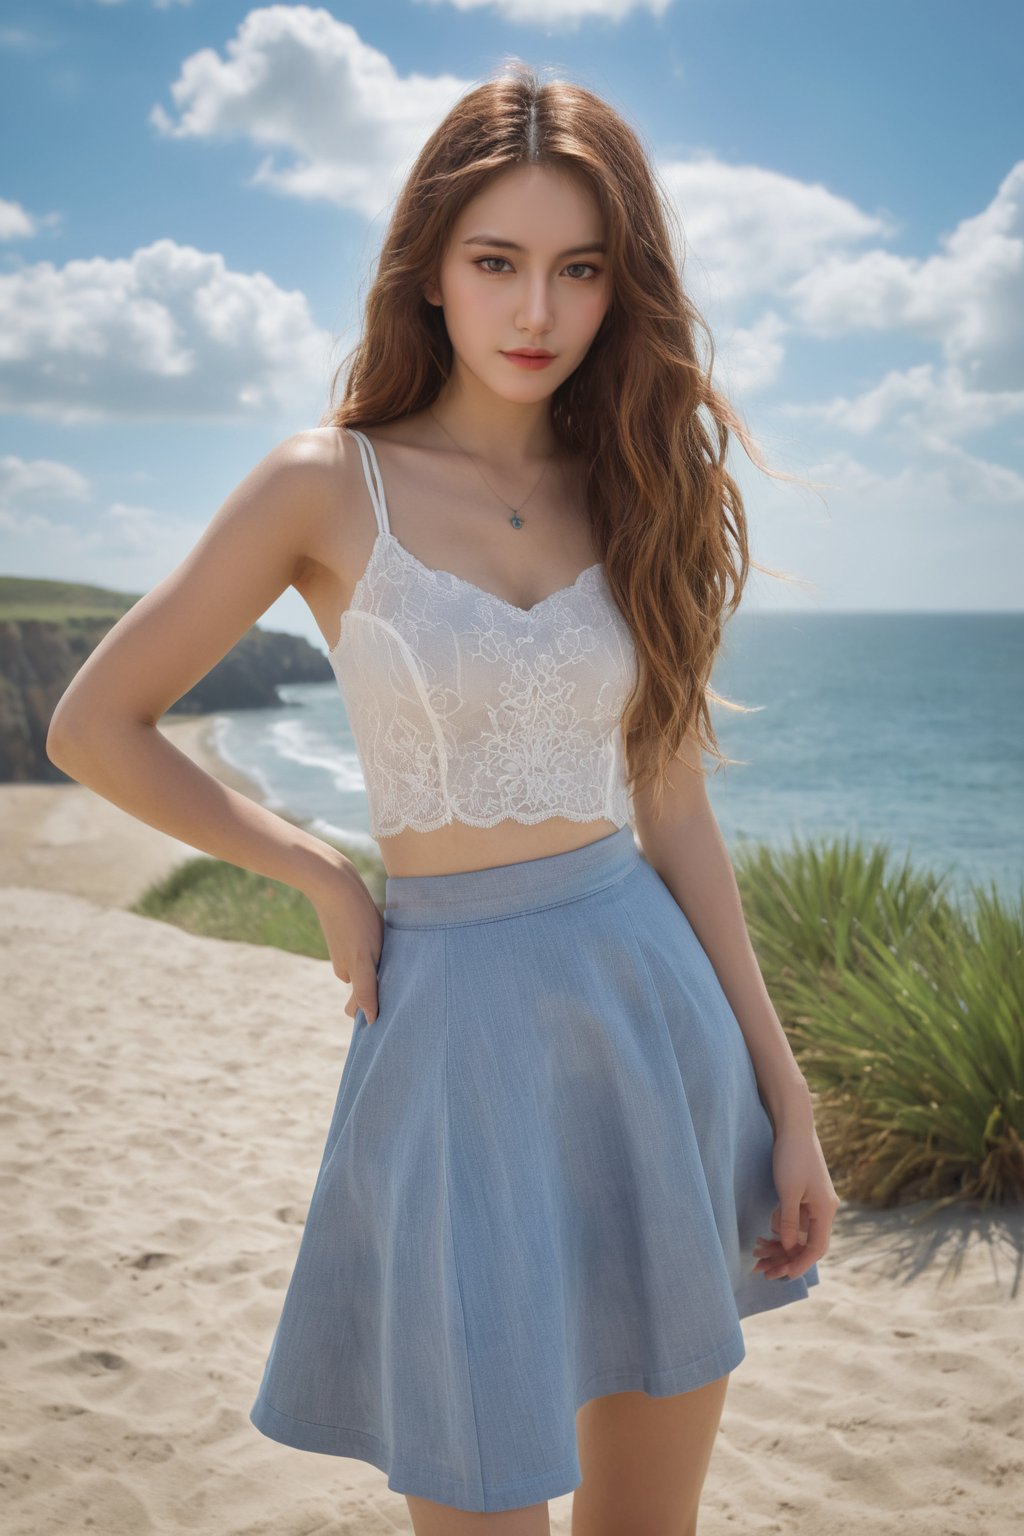  photorealistic,portrait of hubggirl, 
(ultra realistic,best quality),photorealistic,Extremely Realistic, in depth, cinematic light,

1girl,(medium hair:1.4),outdoors,(front:1.3),(standing:1.3),seaside,cloudy sky,High-low skirt,(cowboy_shot:1.2),navelwavy hair, 

perfect lighting, vibrant colors, intricate details, high detailed skin, pale skin, intricate background, realism,realistic,raw,analog,portrait,photorealistic, taken by Canon EOS,SIGMA Art Lens 35mm F1.4,ISO 200 Shutter Speed 2000,Vivid picture,